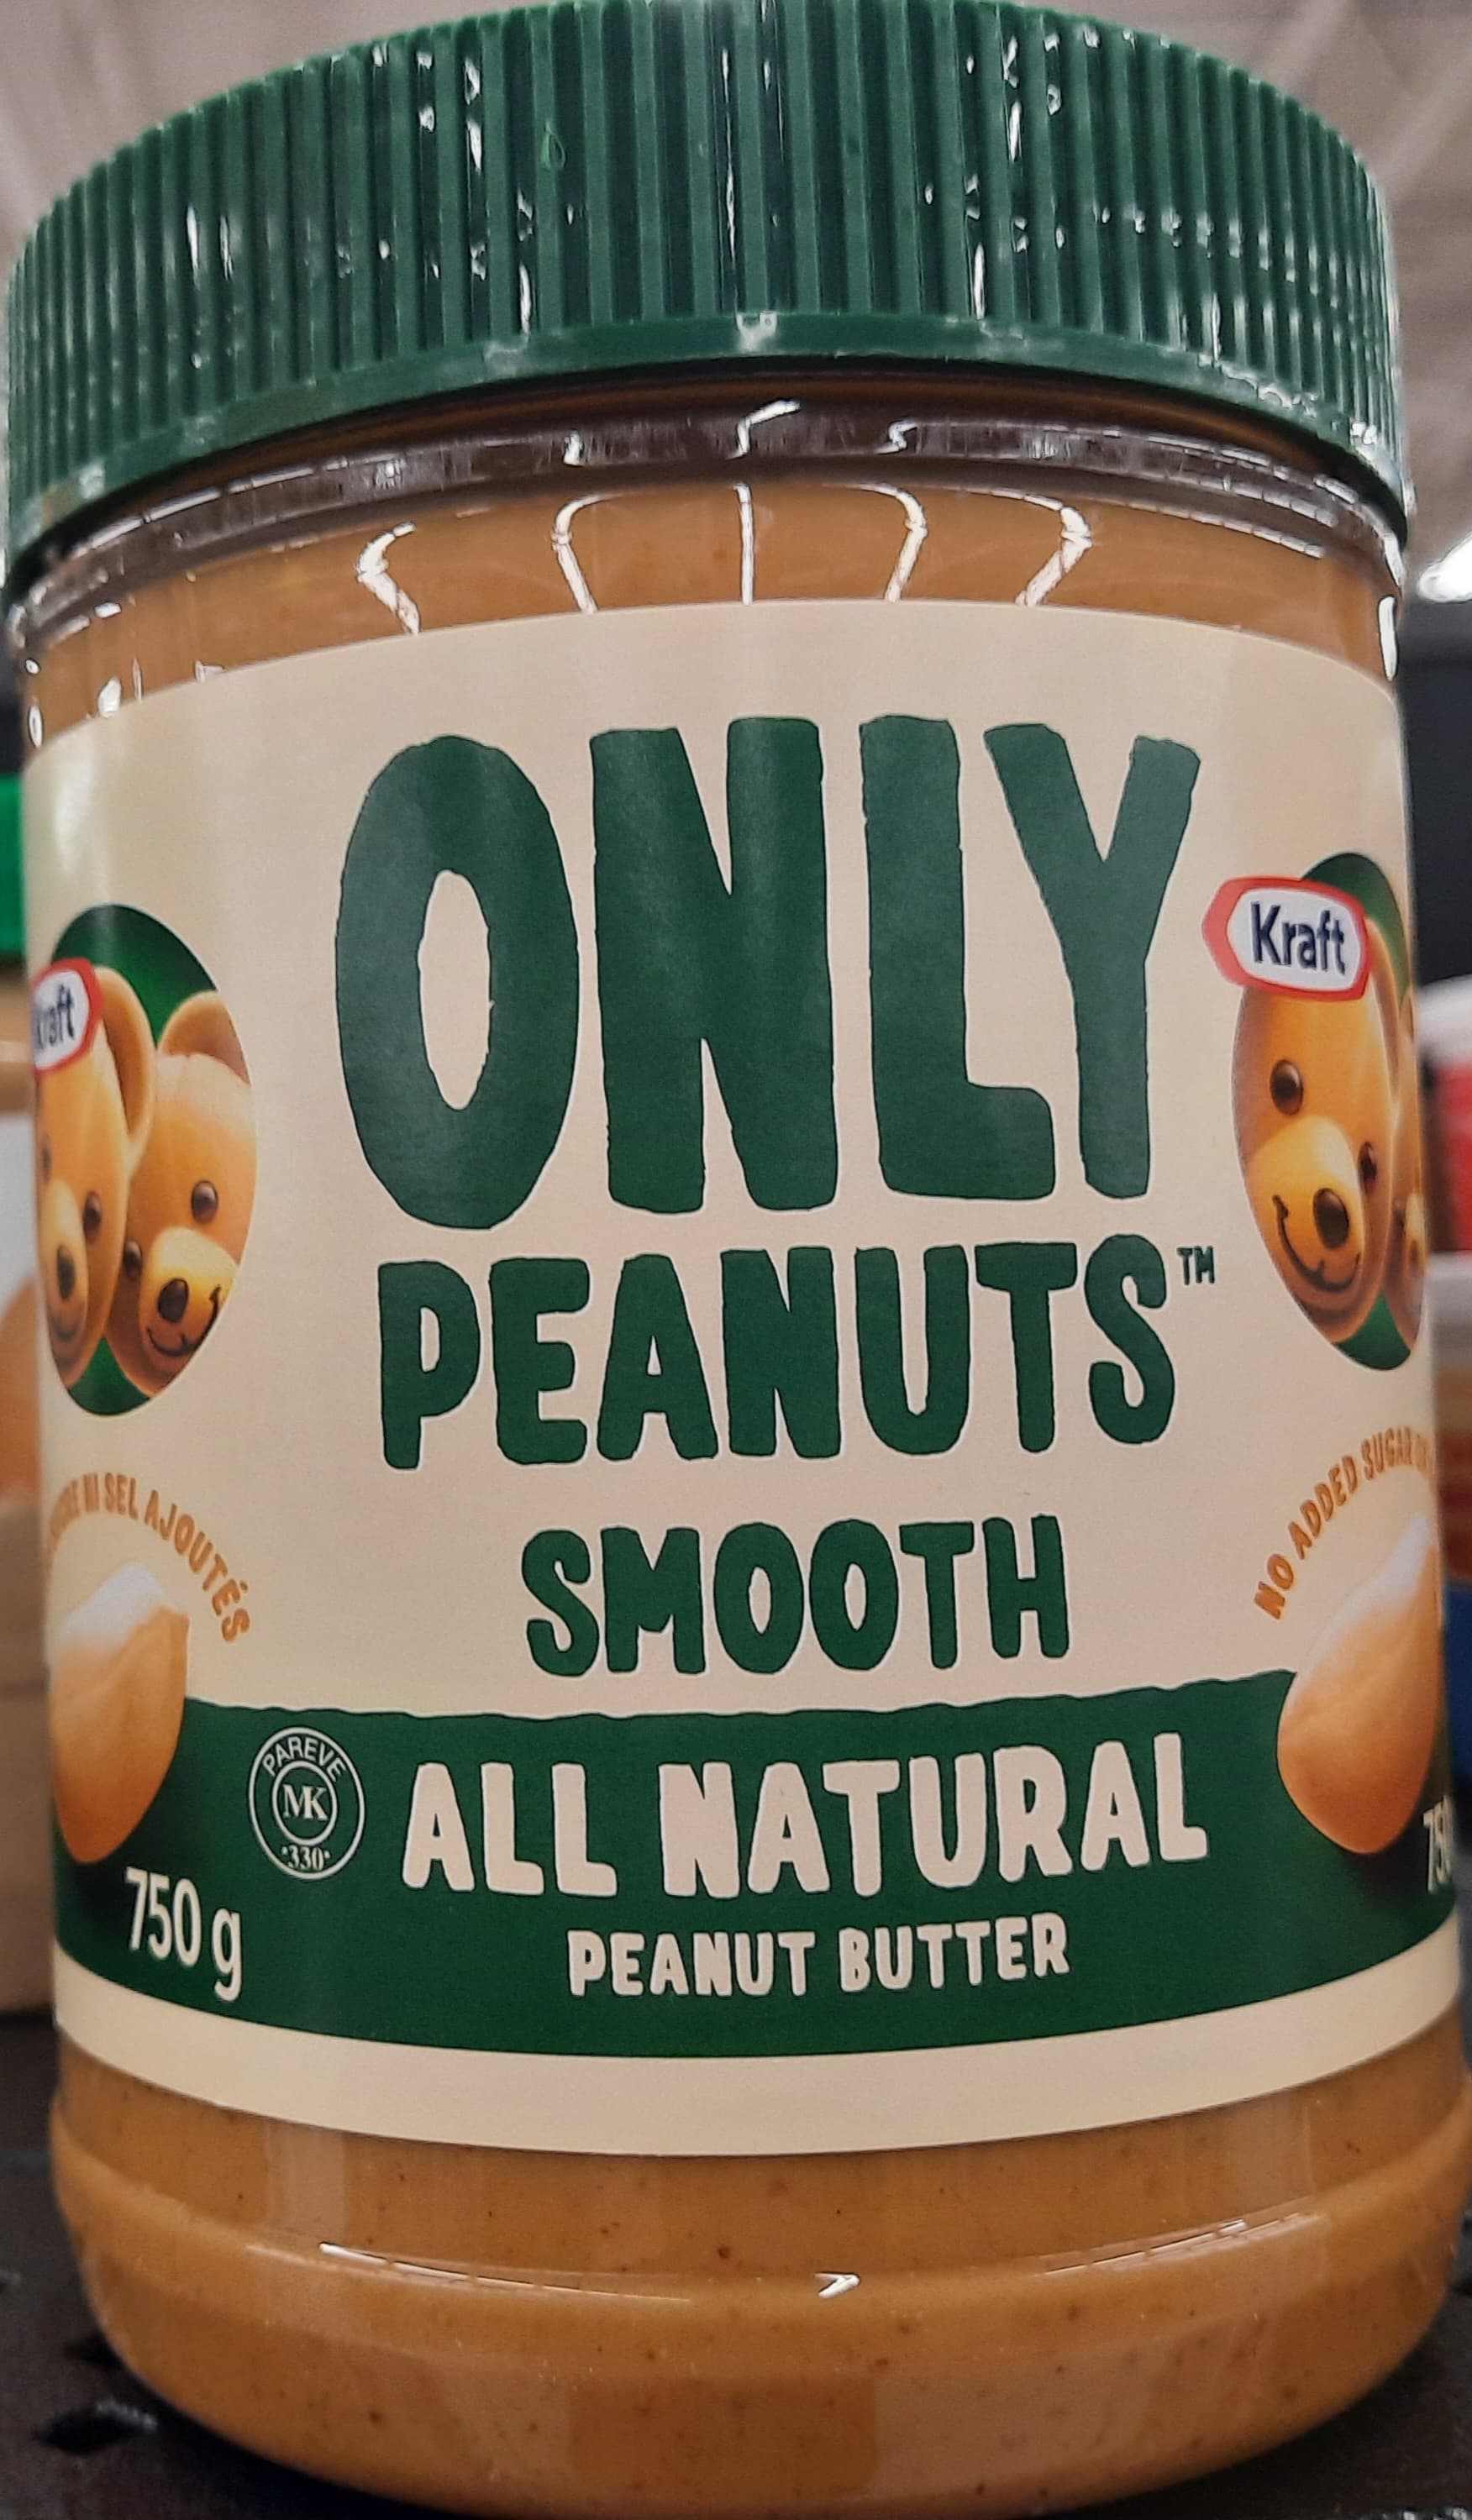 Kraft Only Peanuts Crunchy All Natural Peanut Butter 750g - Cooking &  Baking - General Groceries